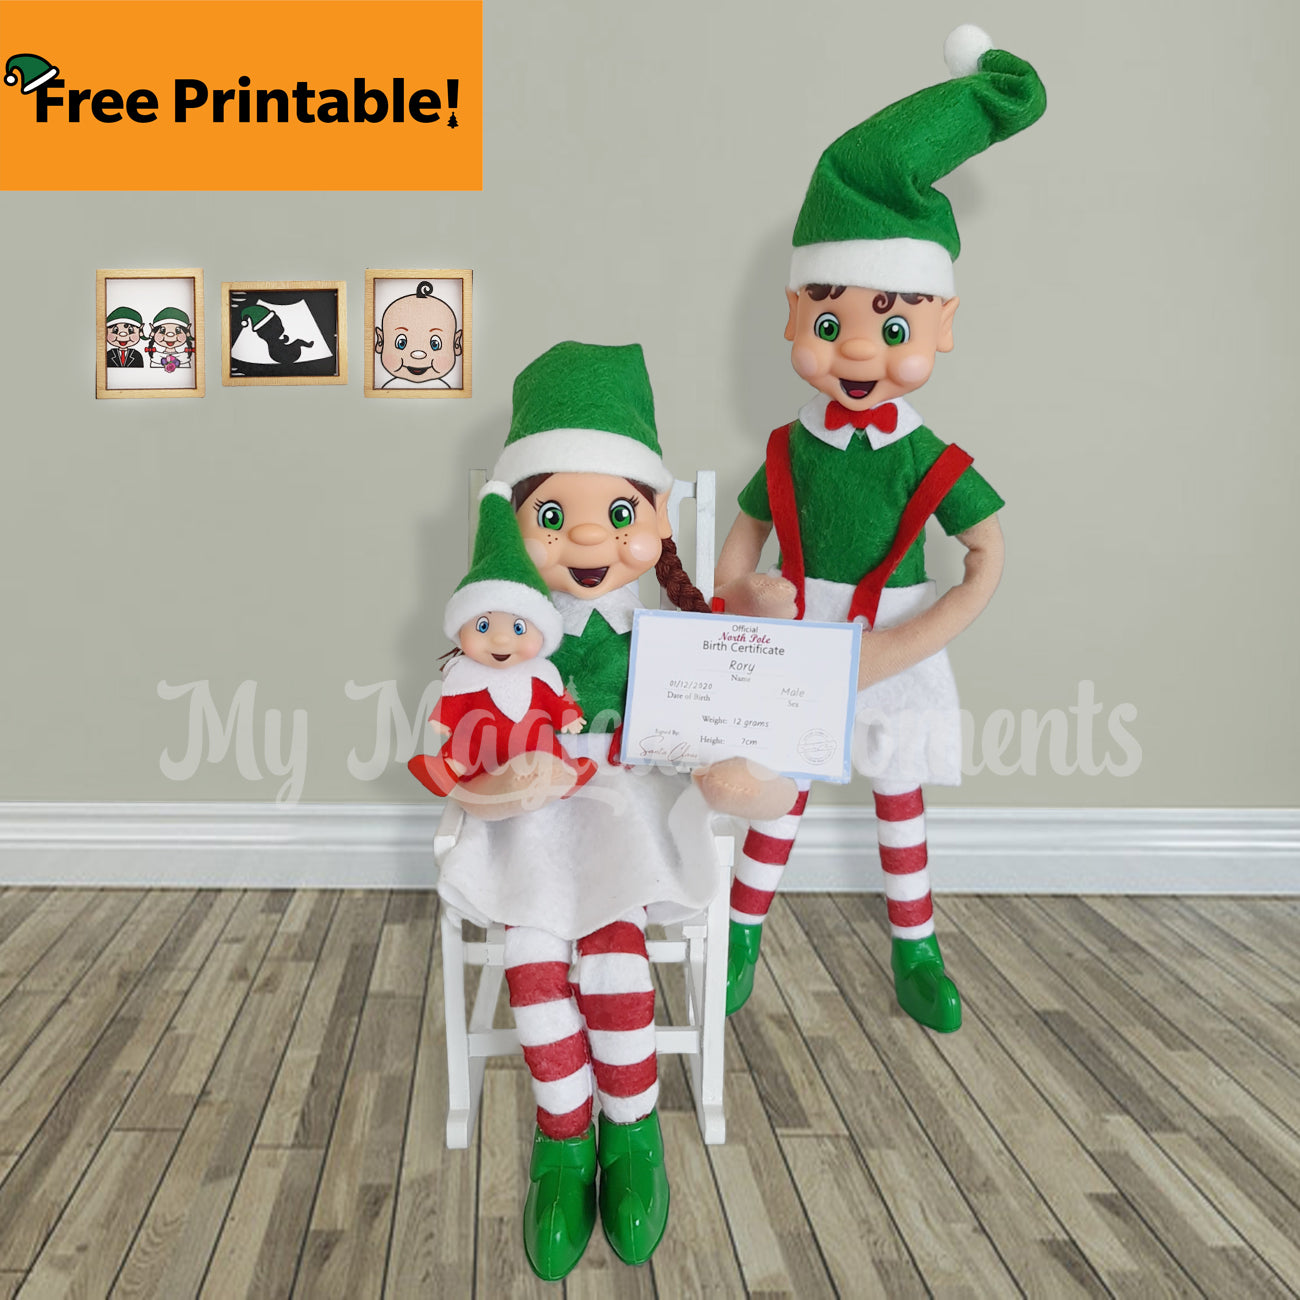 Elf Baby announcement. Family of elves holding a elf baby birth certificate